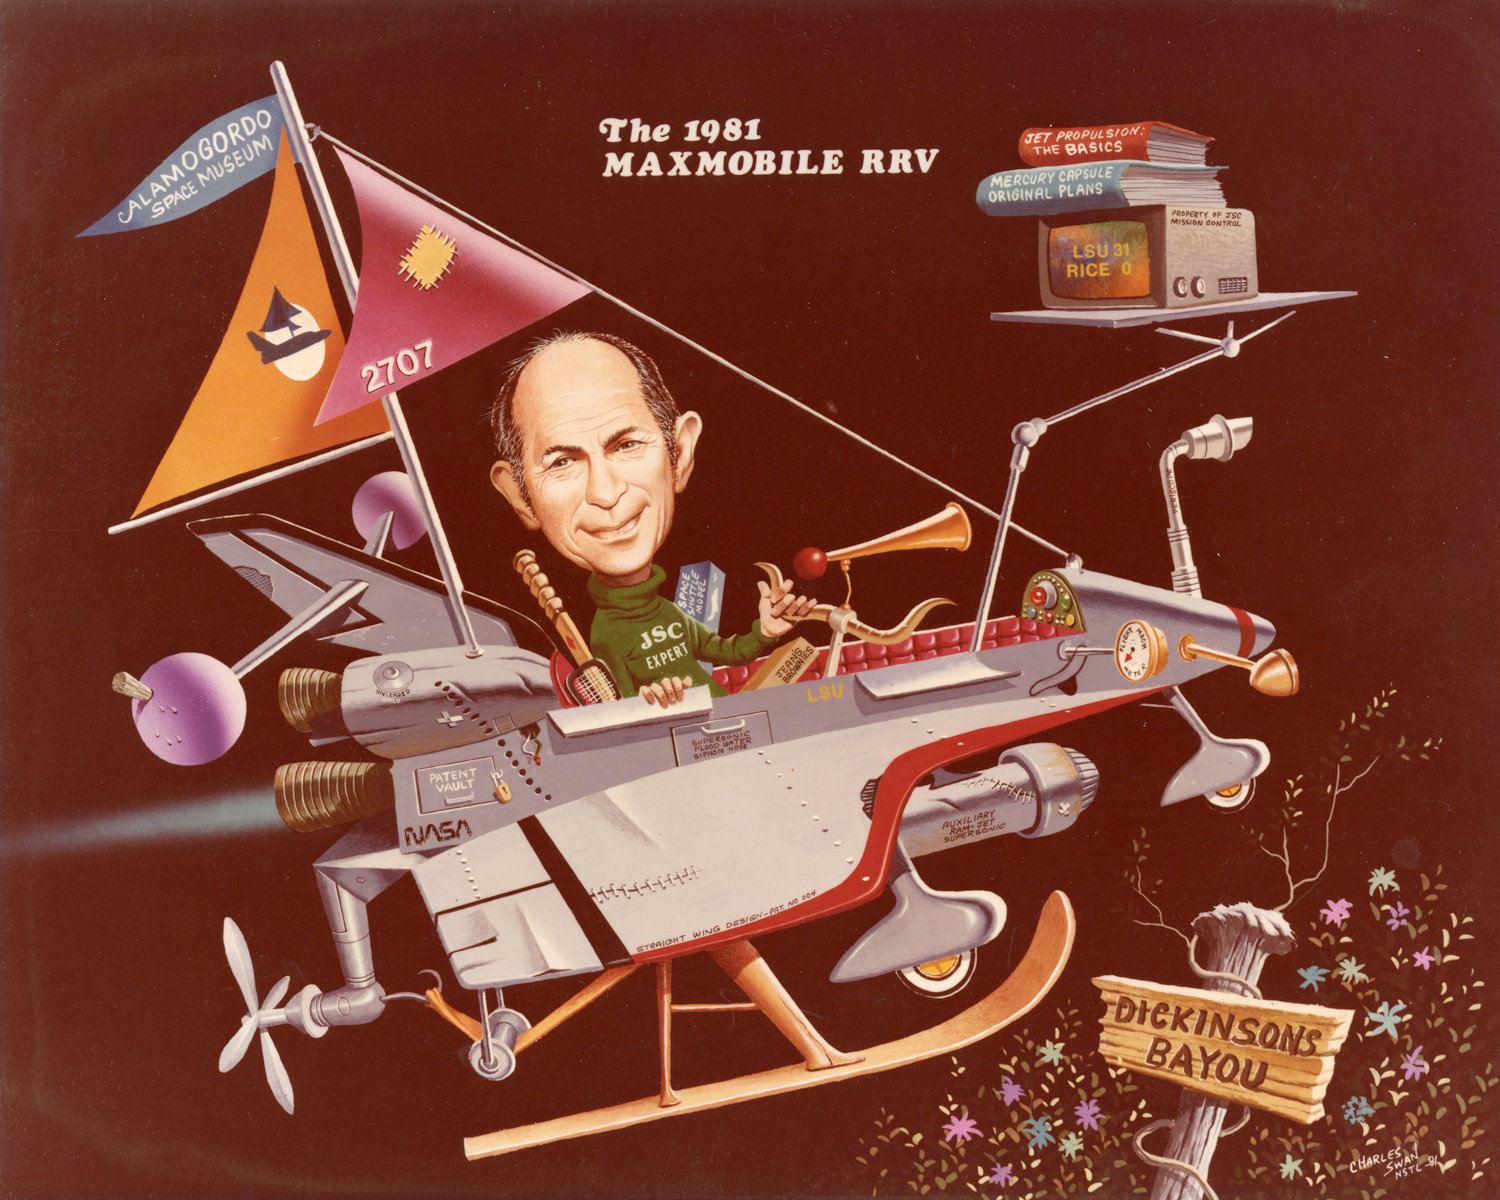 The 1981 Max Mobile RRV. This caricature shows Faget as he readies for retirement in his “RRV” – Retirement, Recreation Vehicle – a combination of a space shuttle, motorboat, sail plane, and seaplane. Note the flag atop the mast.